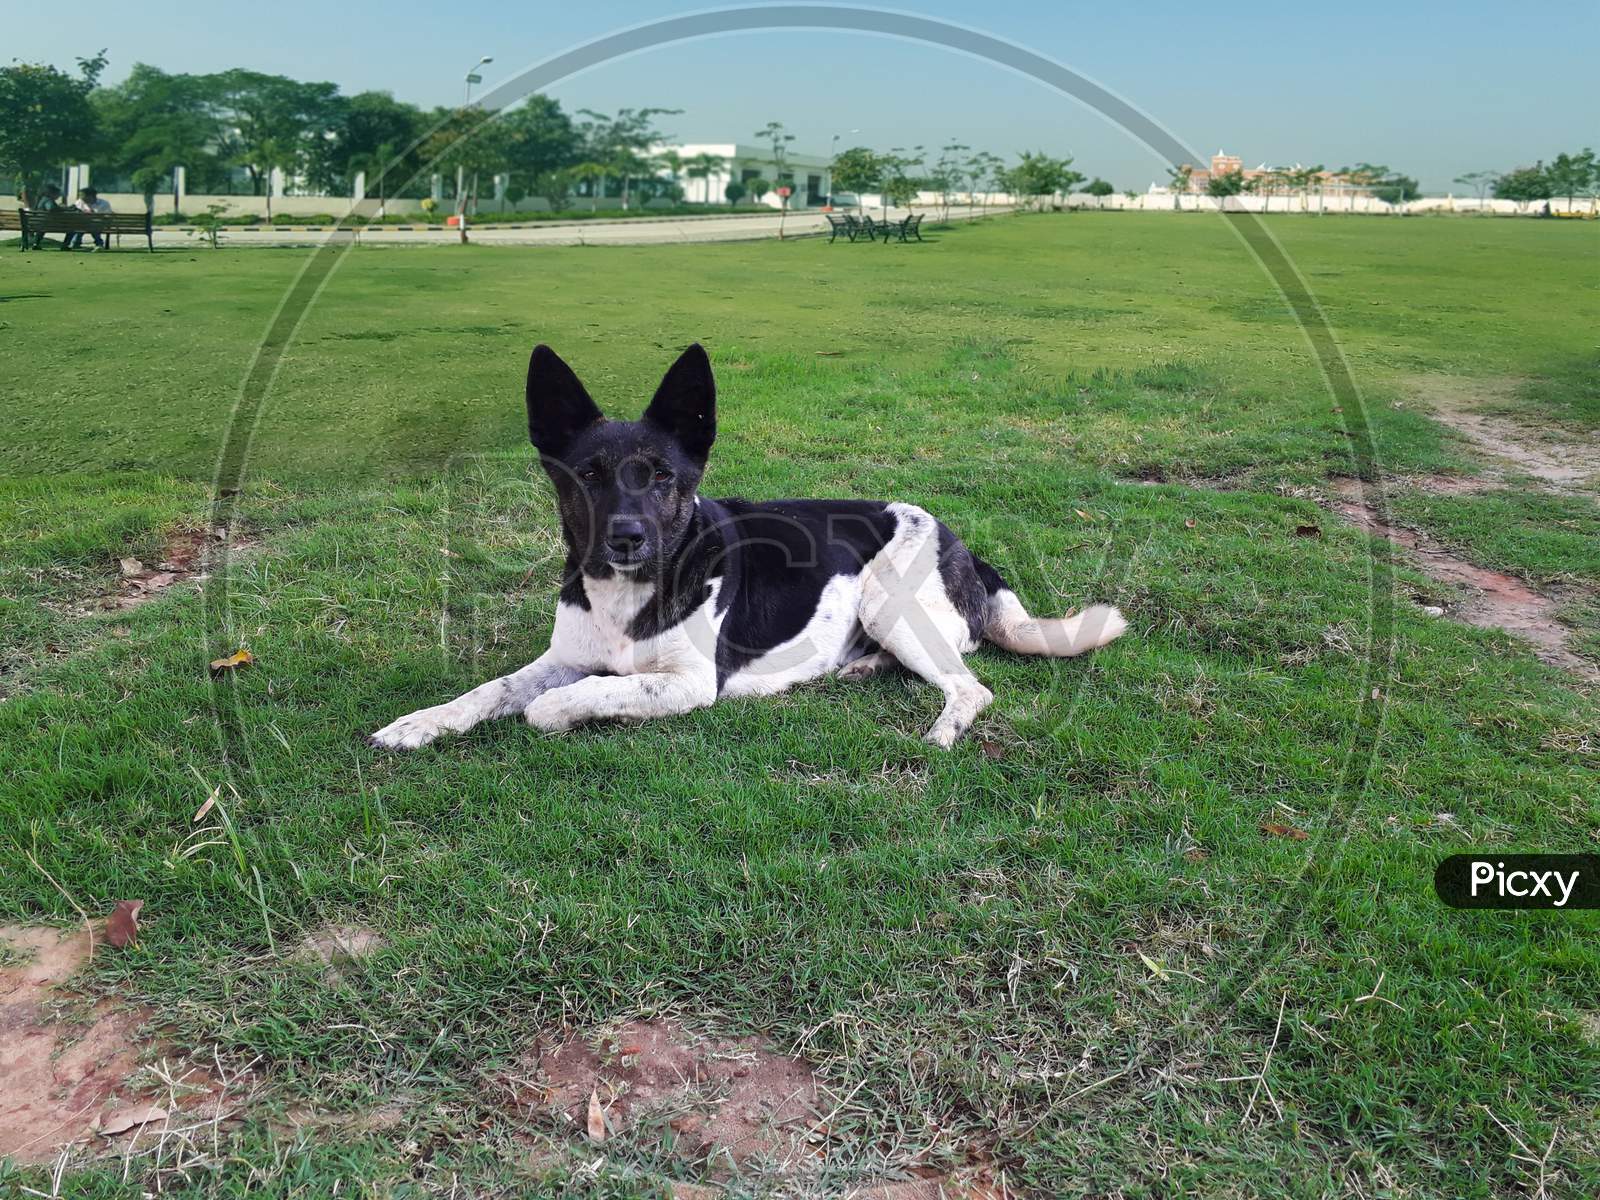 A little pet dog is sitting on green grass in a lawn or public garden | a cute puppy in black and white color